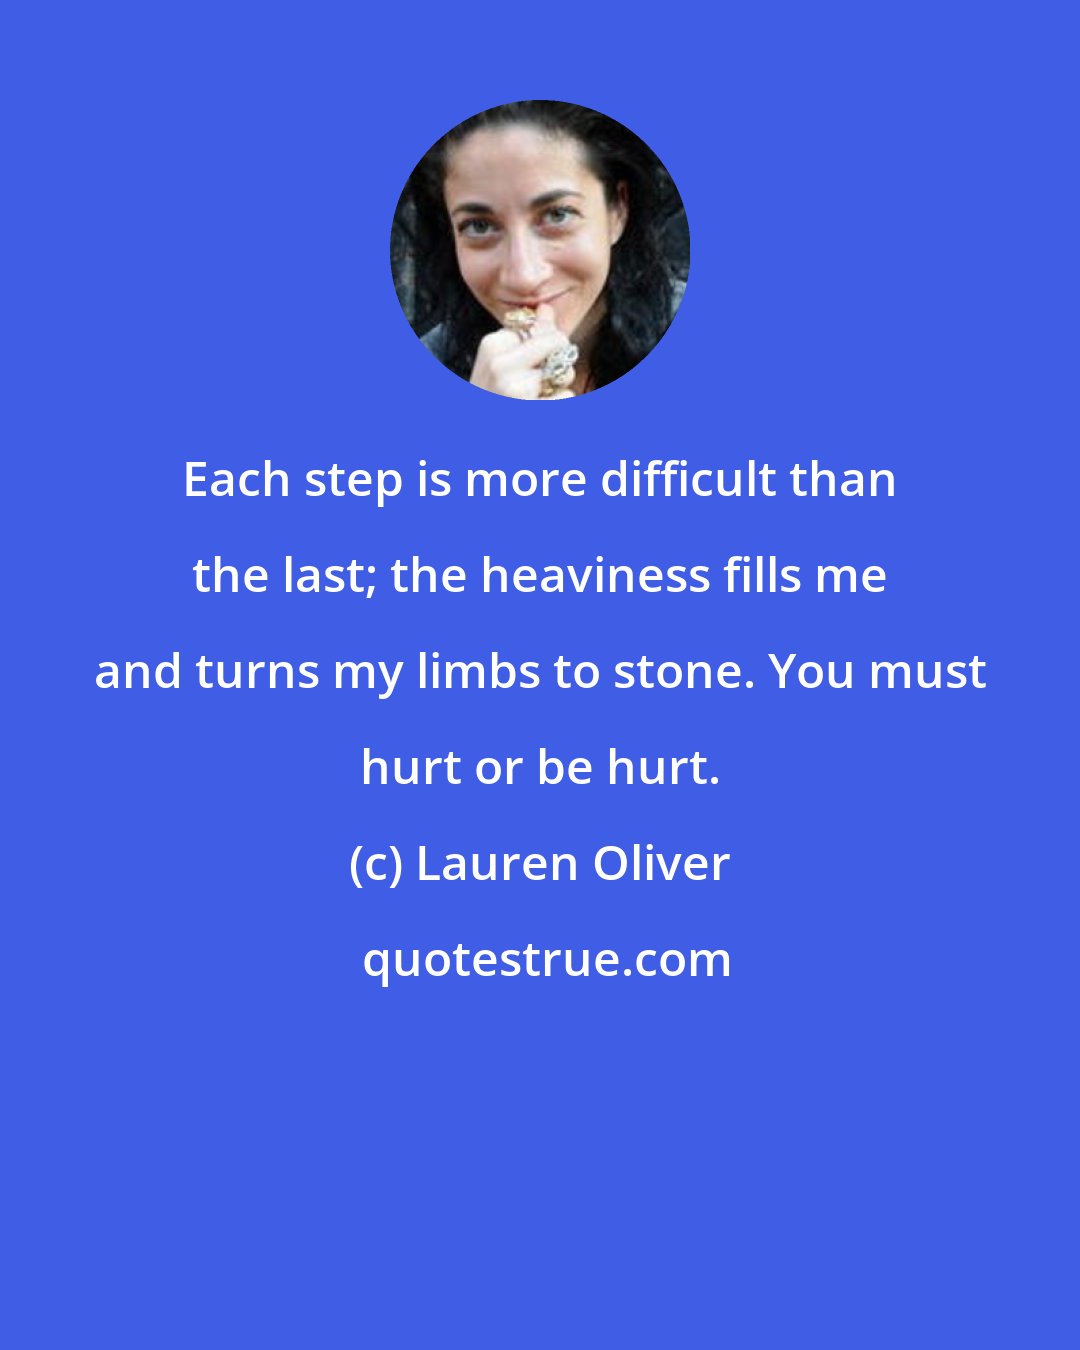 Lauren Oliver: Each step is more difficult than the last; the heaviness fills me and turns my limbs to stone. You must hurt or be hurt.